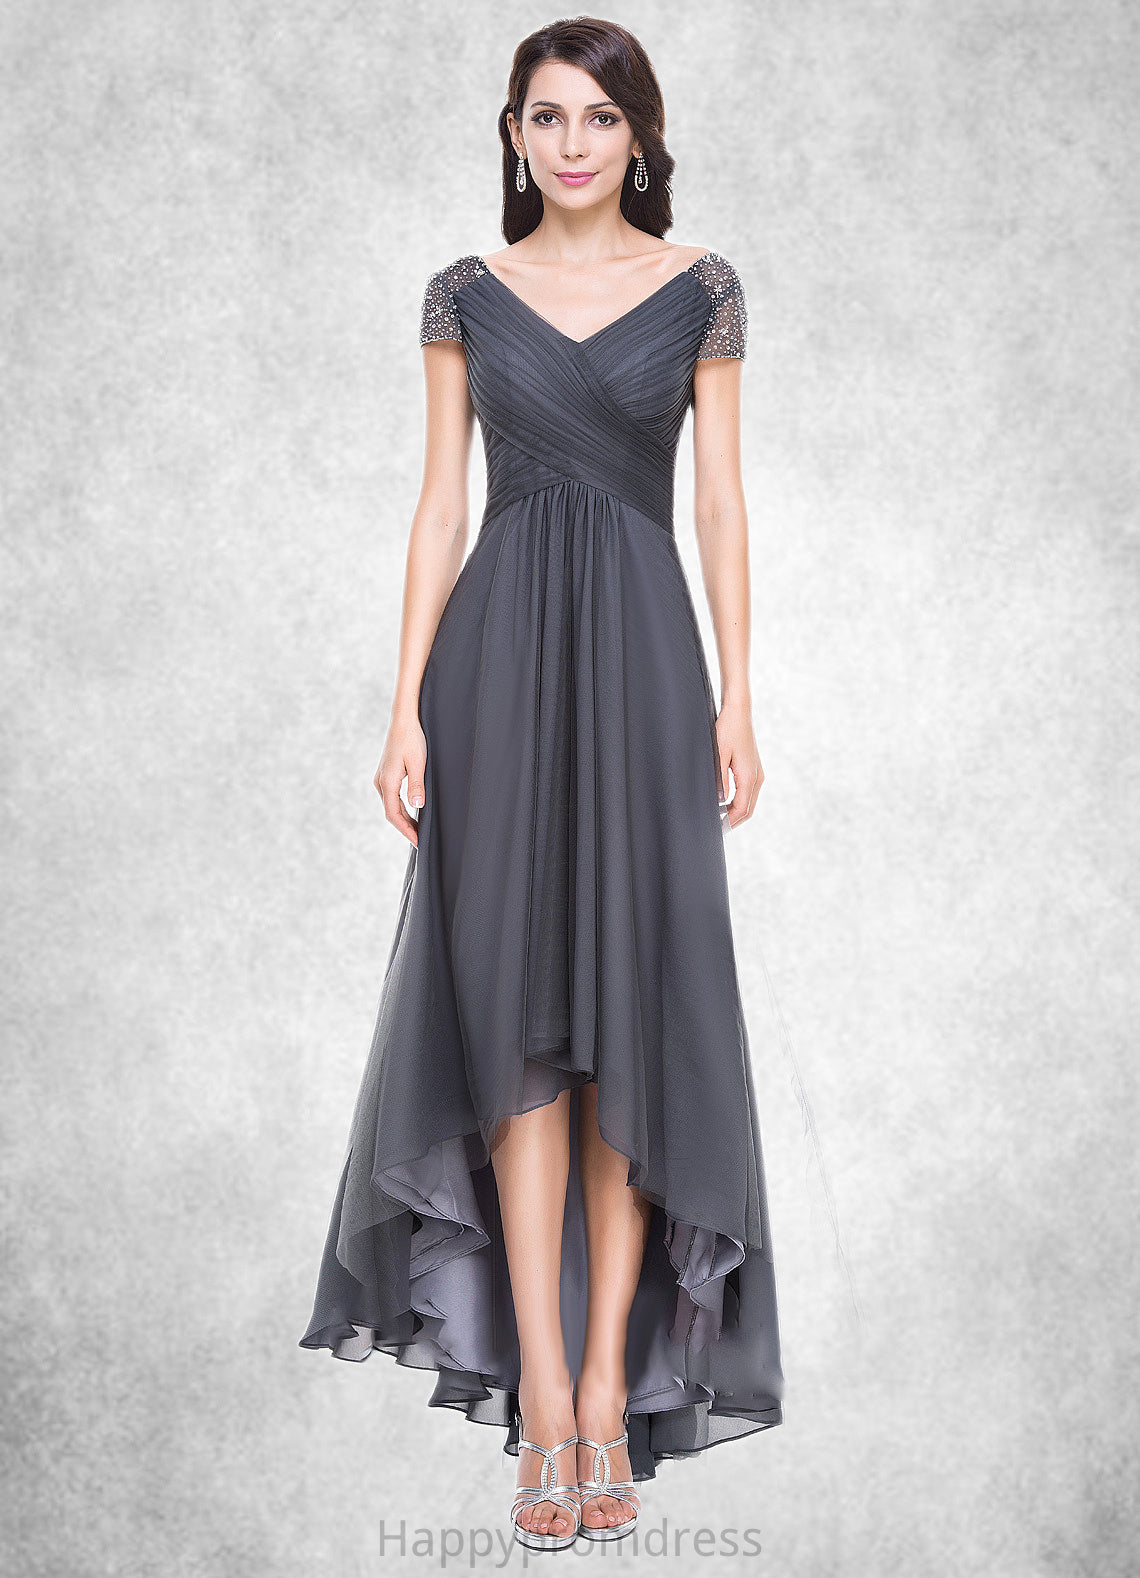 Toni A-Line V-neck Asymmetrical Tulle Mother of the Bride Dress With Ruffle Beading Sequins XXS126P0014620